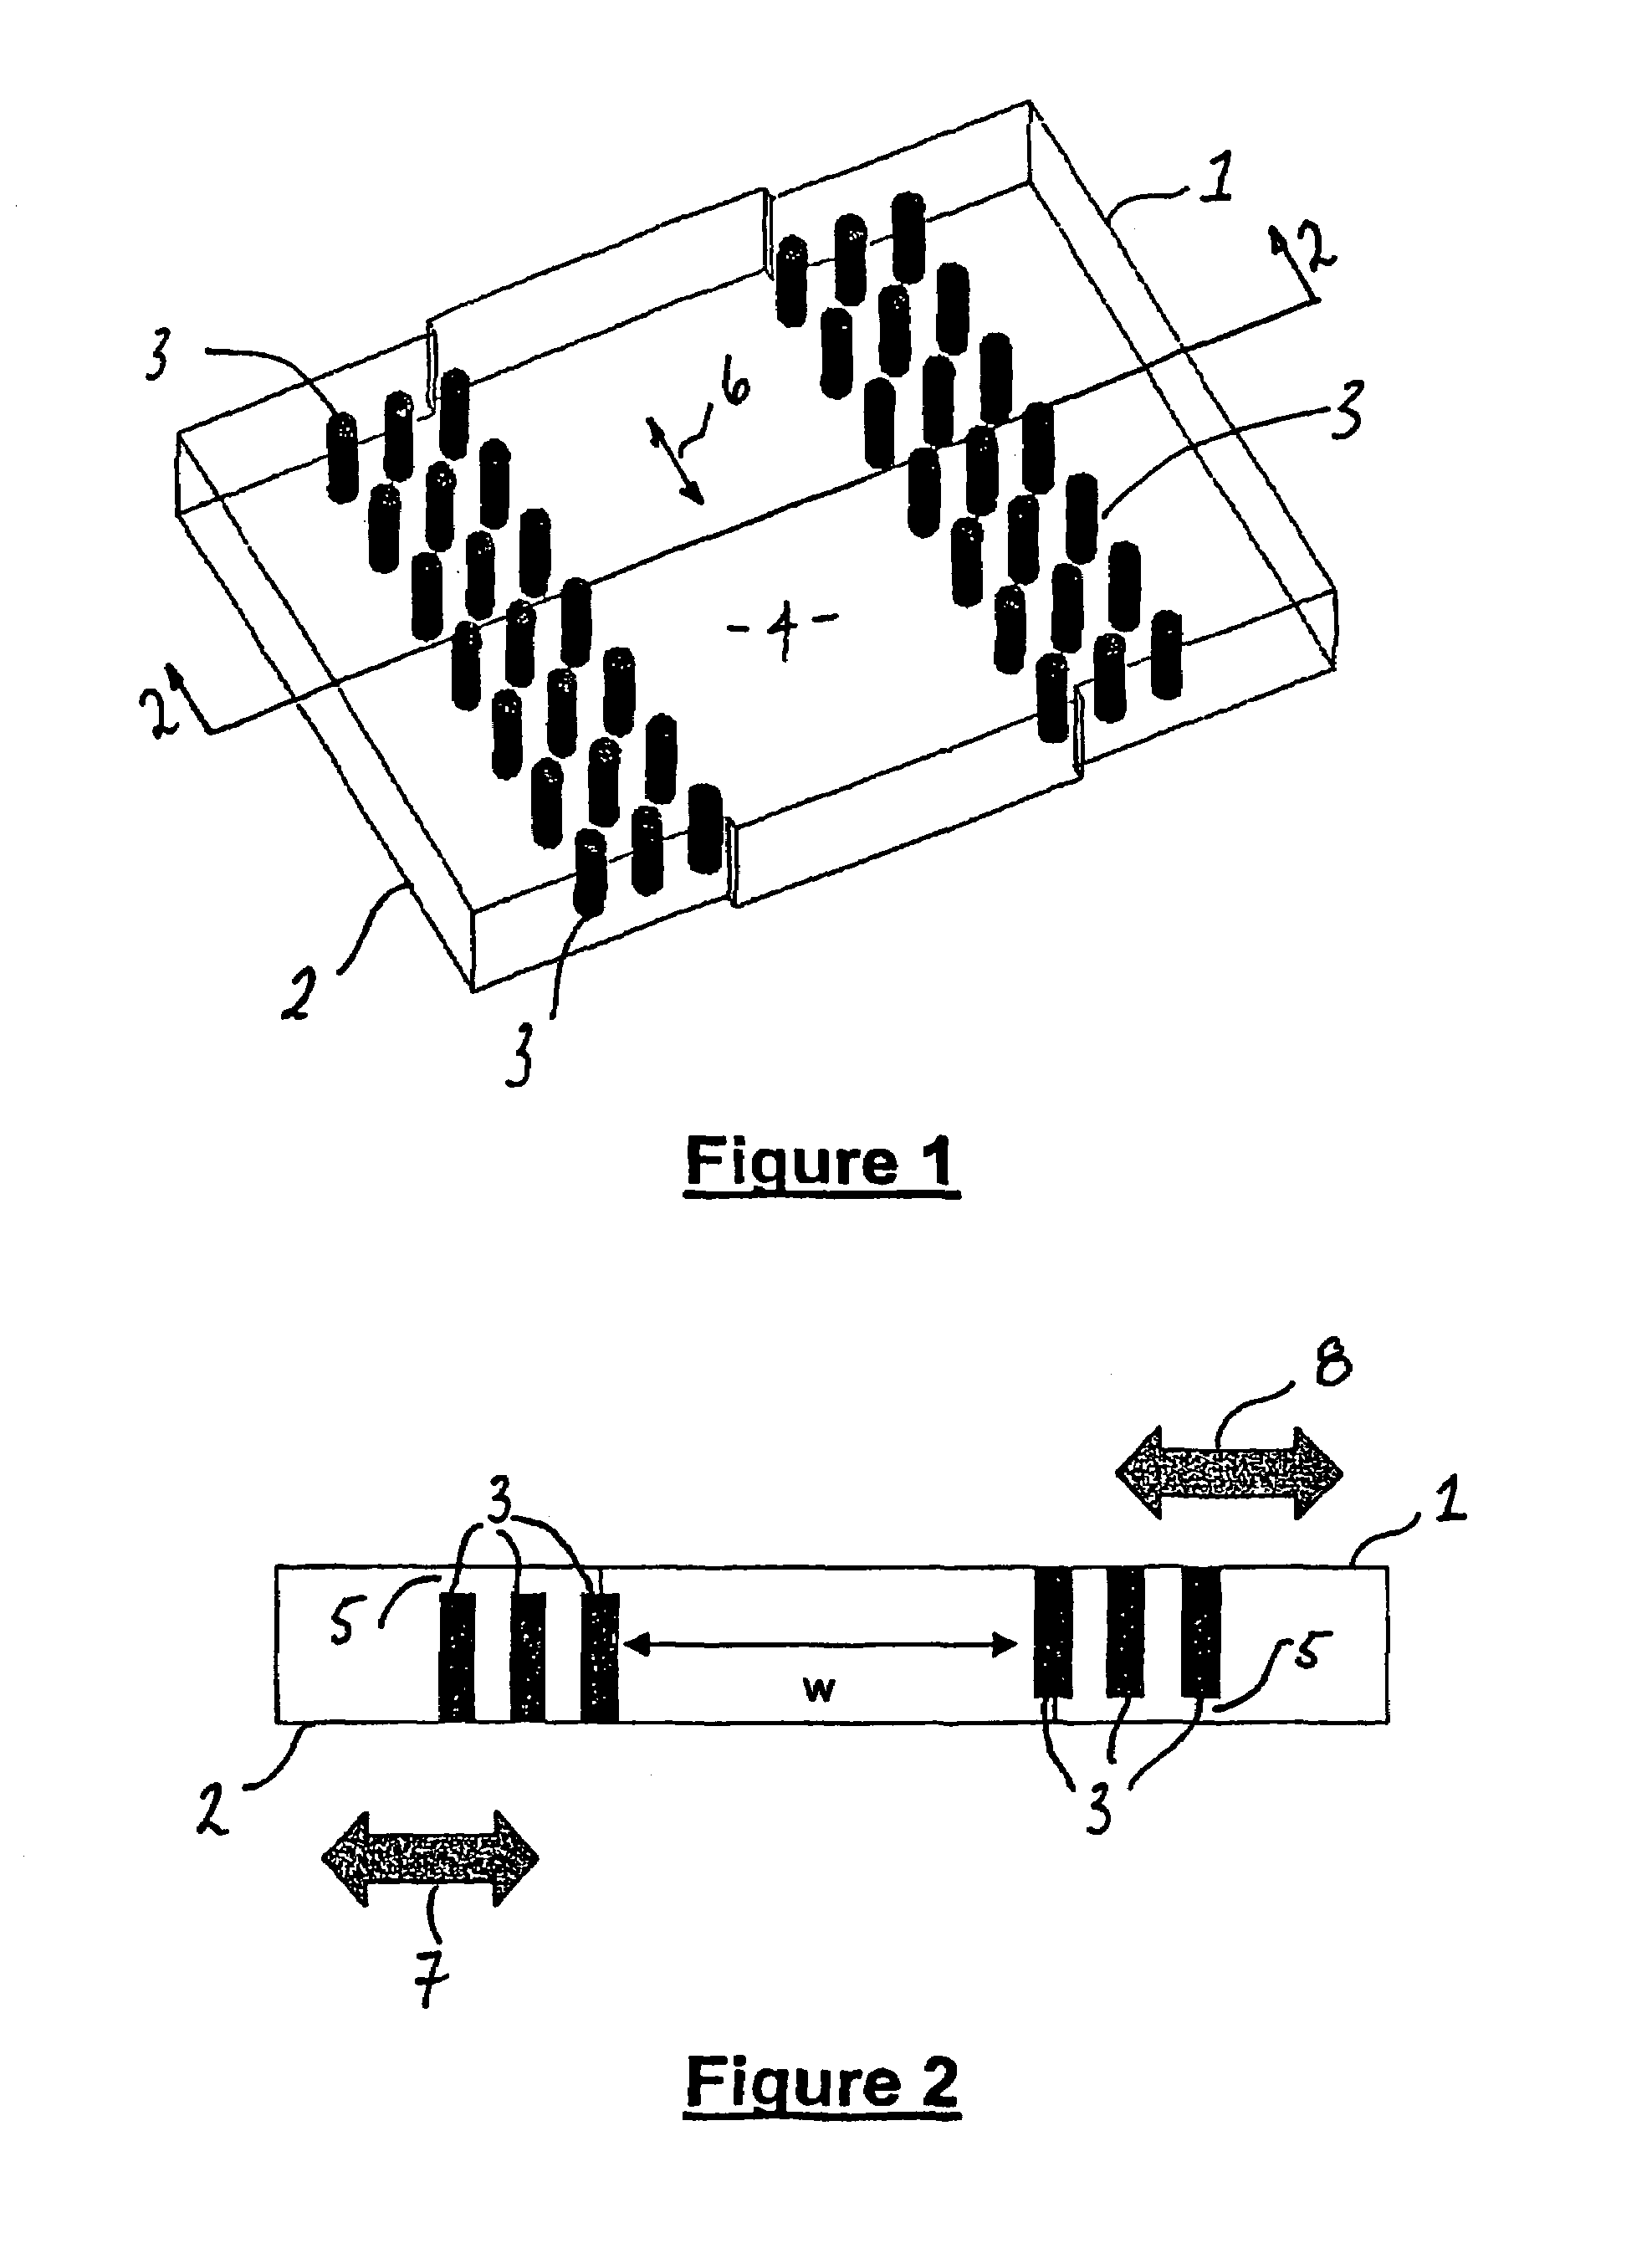 Waveguide and slotted antenna array with moveable rows of spaced posts